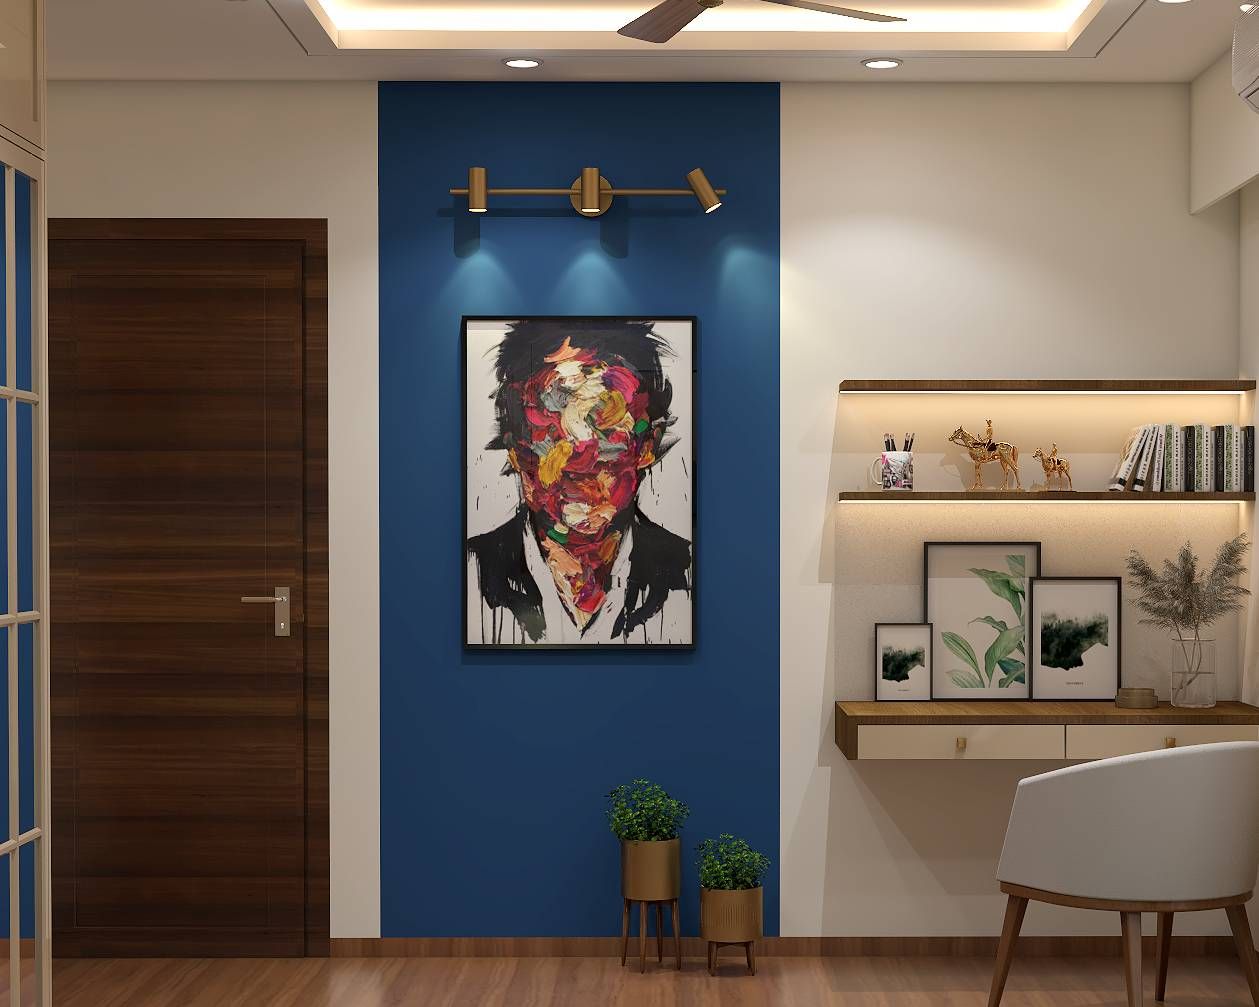 Contemporary Home Office Design With Blue Accent Wall And Art Work